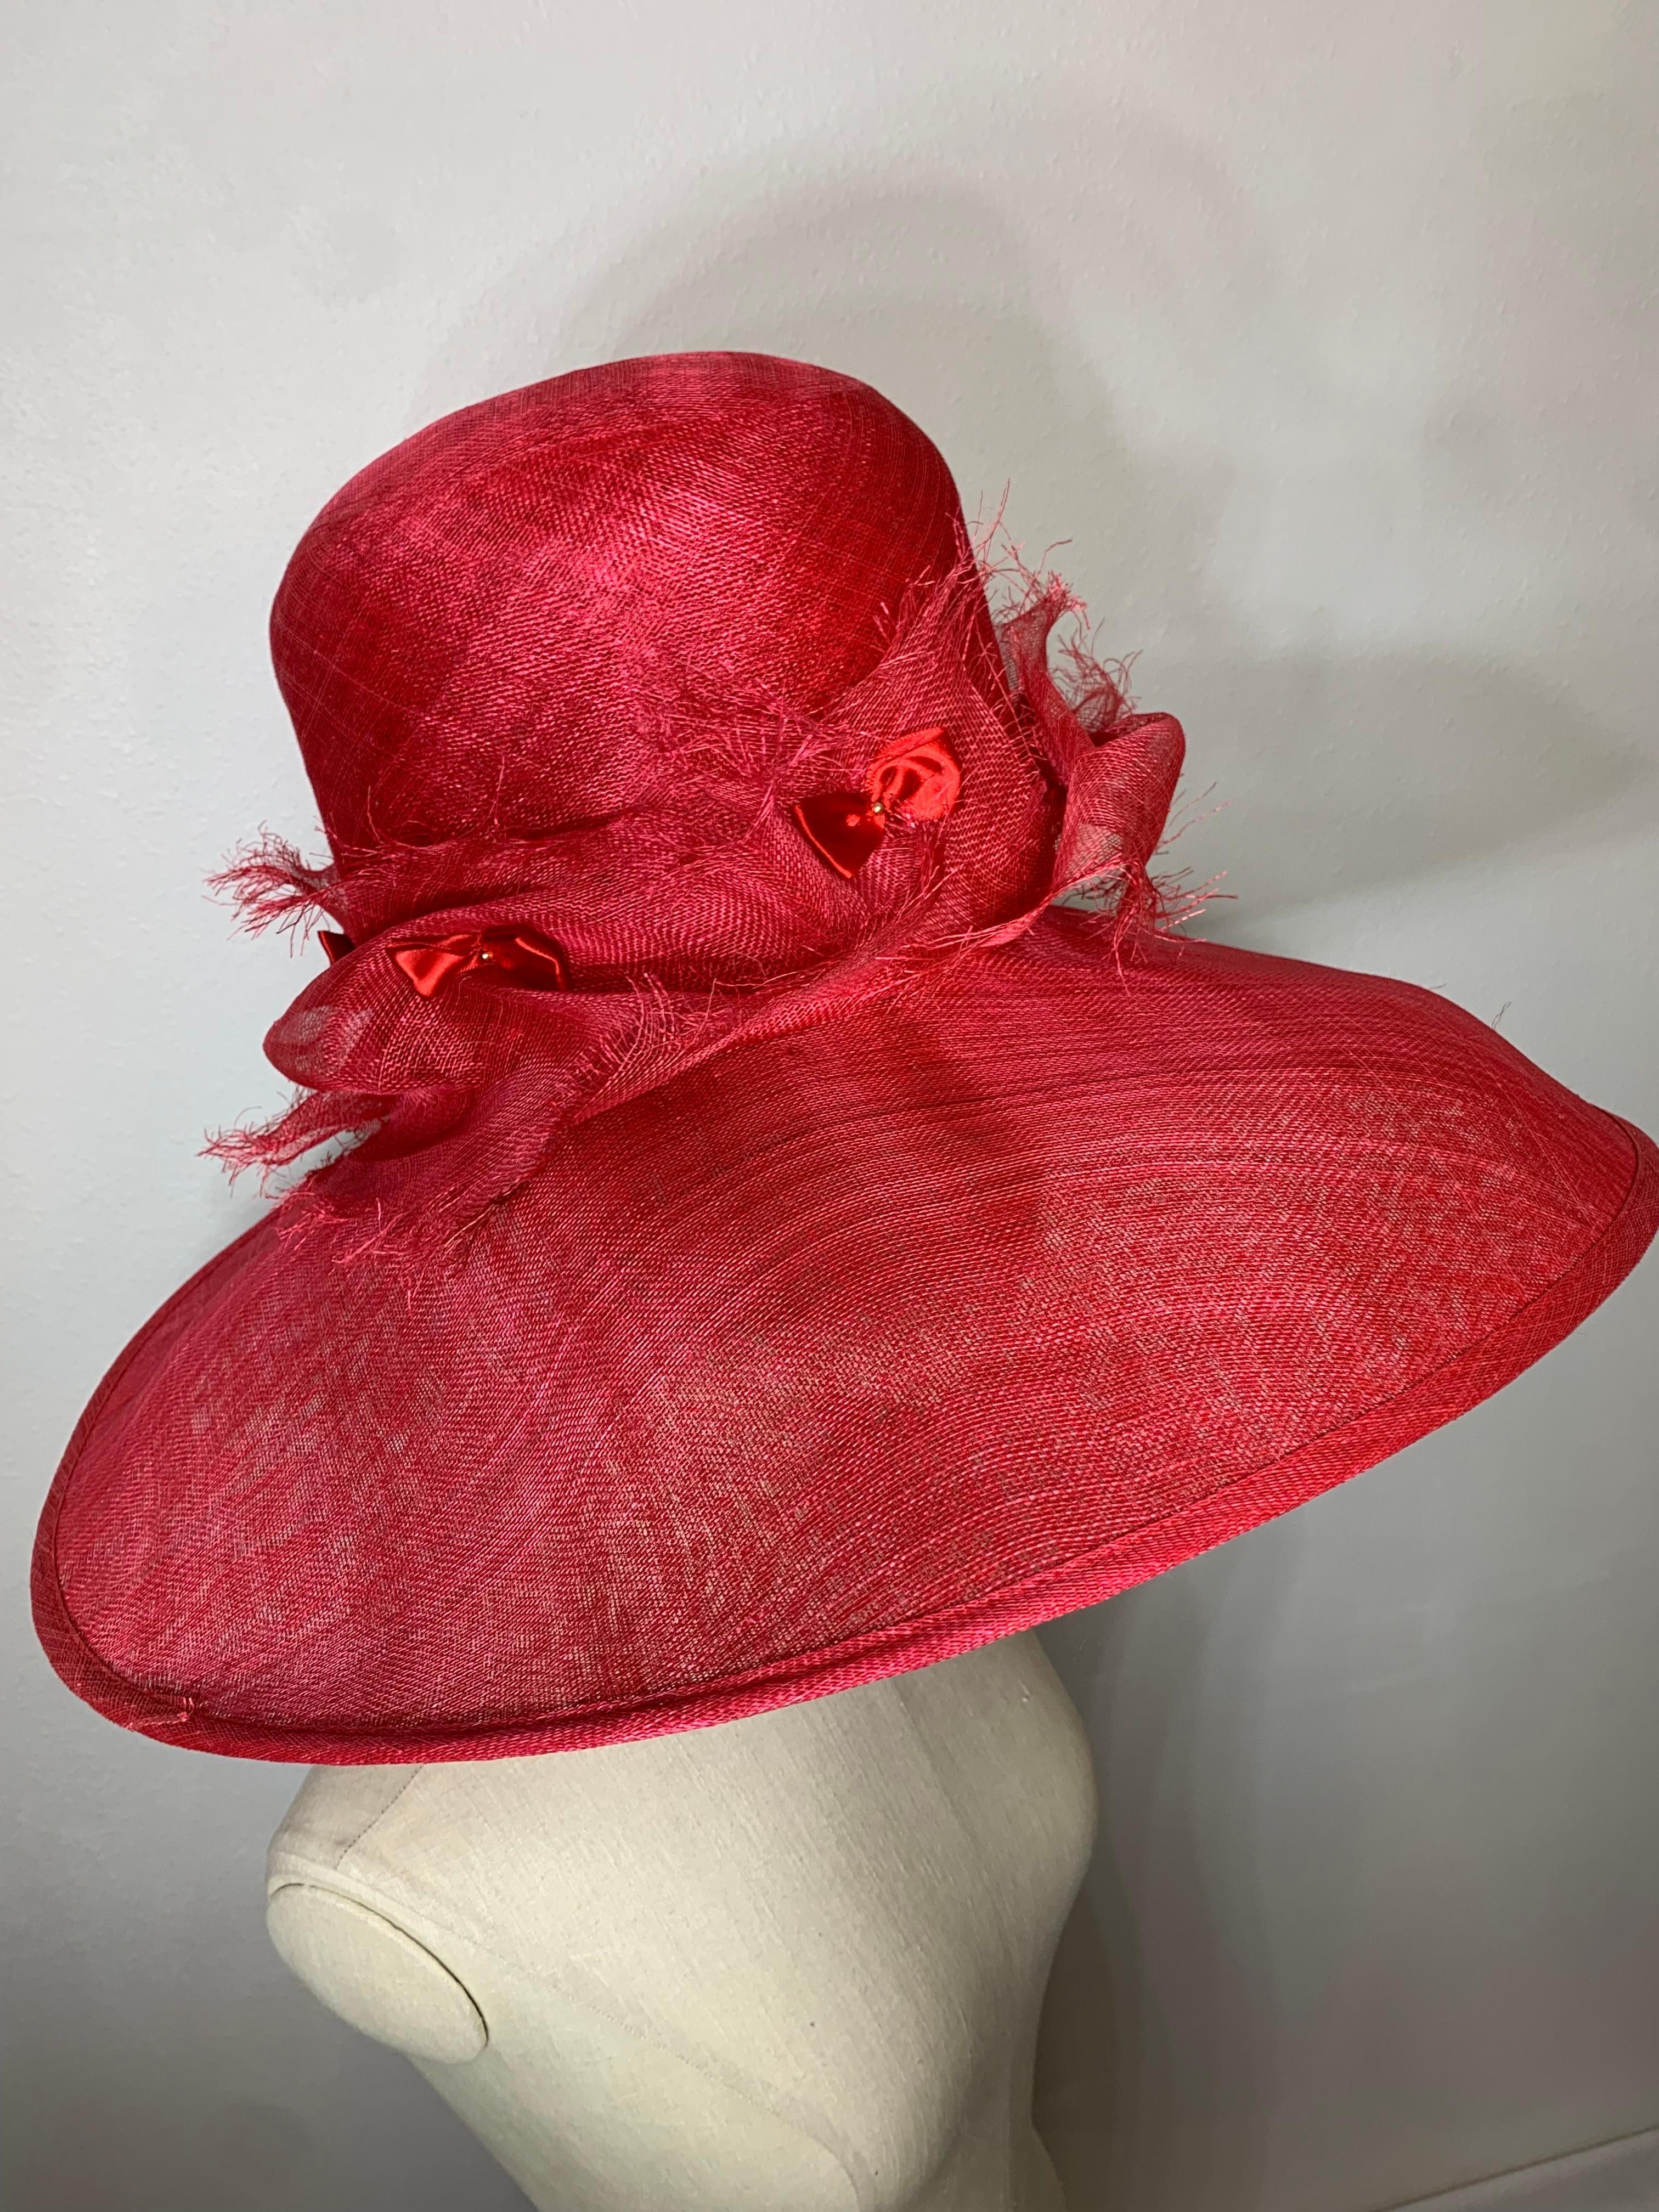 Maison Michel Cardinal Red Sheer Straw Wide Brim Tall Crown Hat w Satin Bows For Sale 2